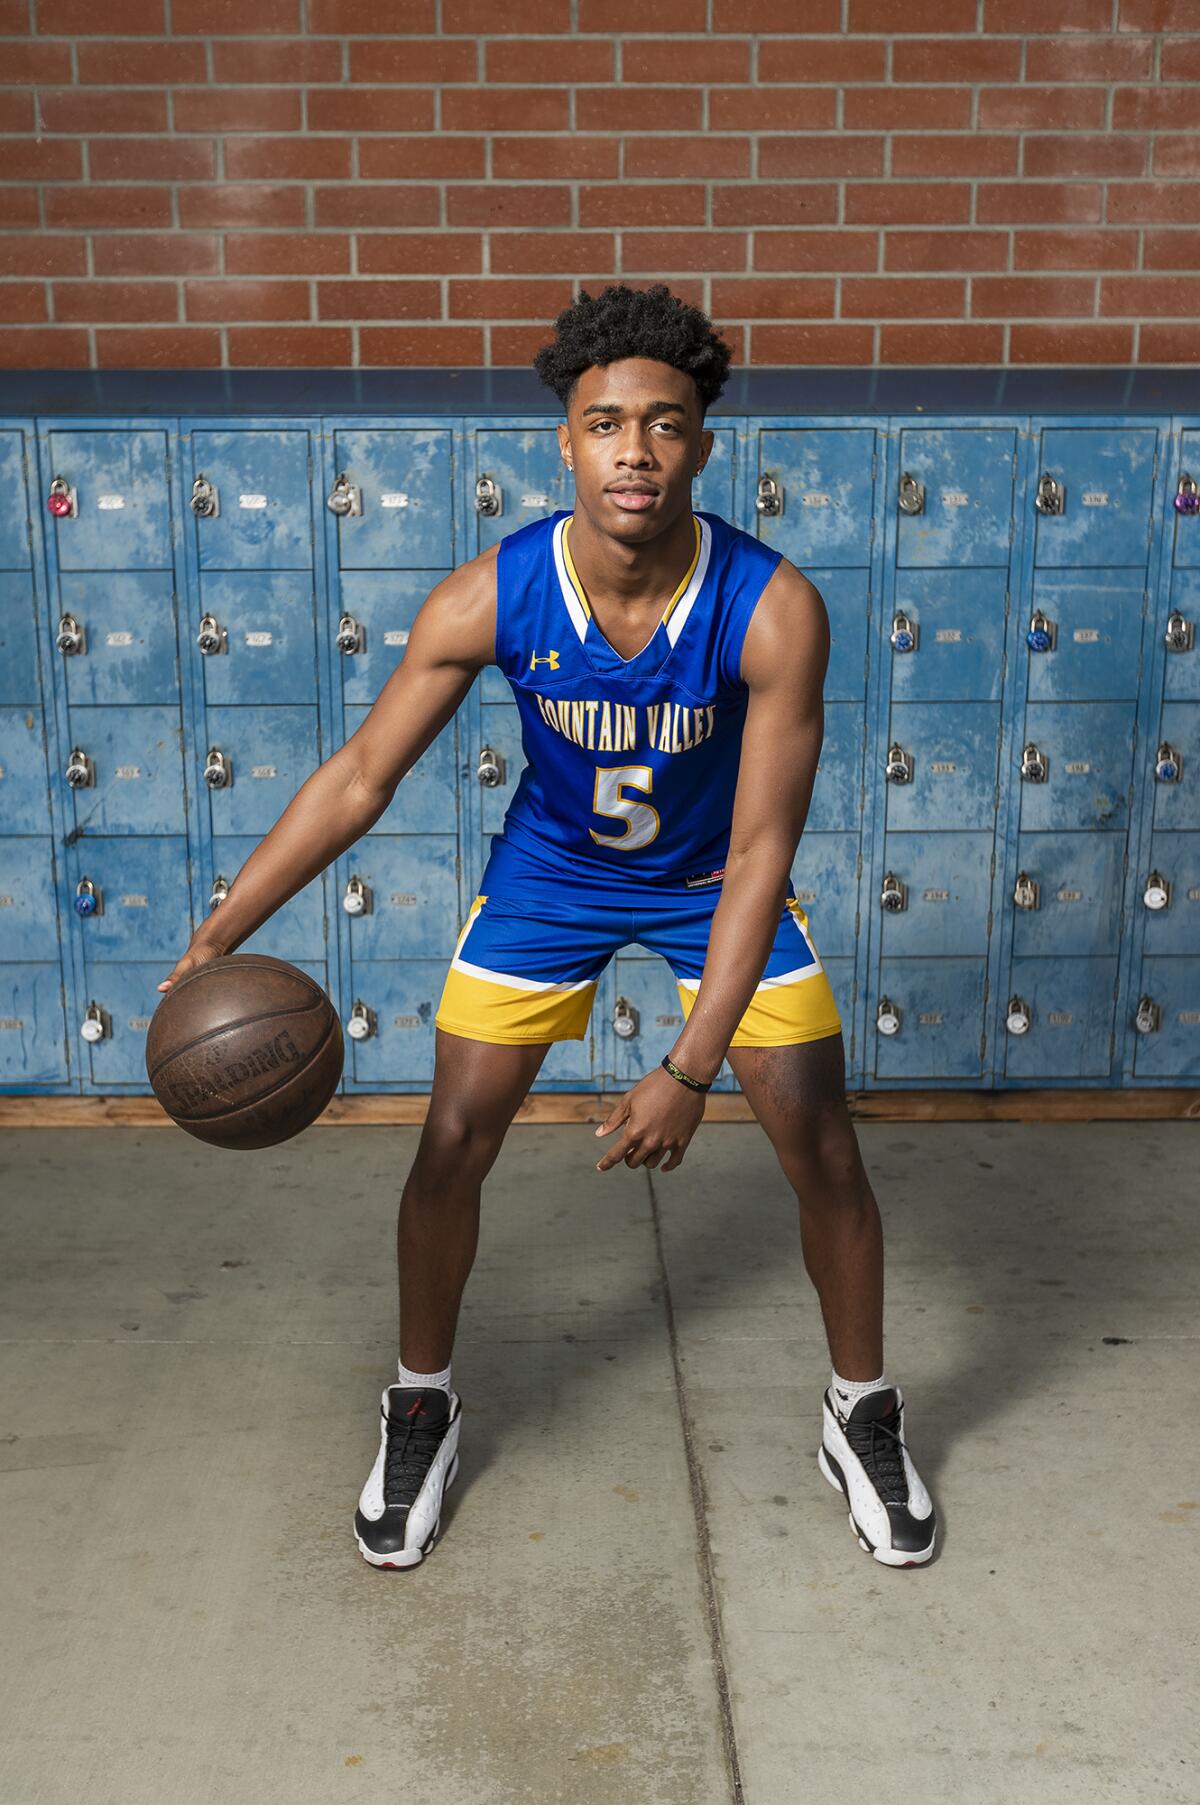 Fountain Valley's Jeremiah Davis is a three-year varsity player in boys' basketball.